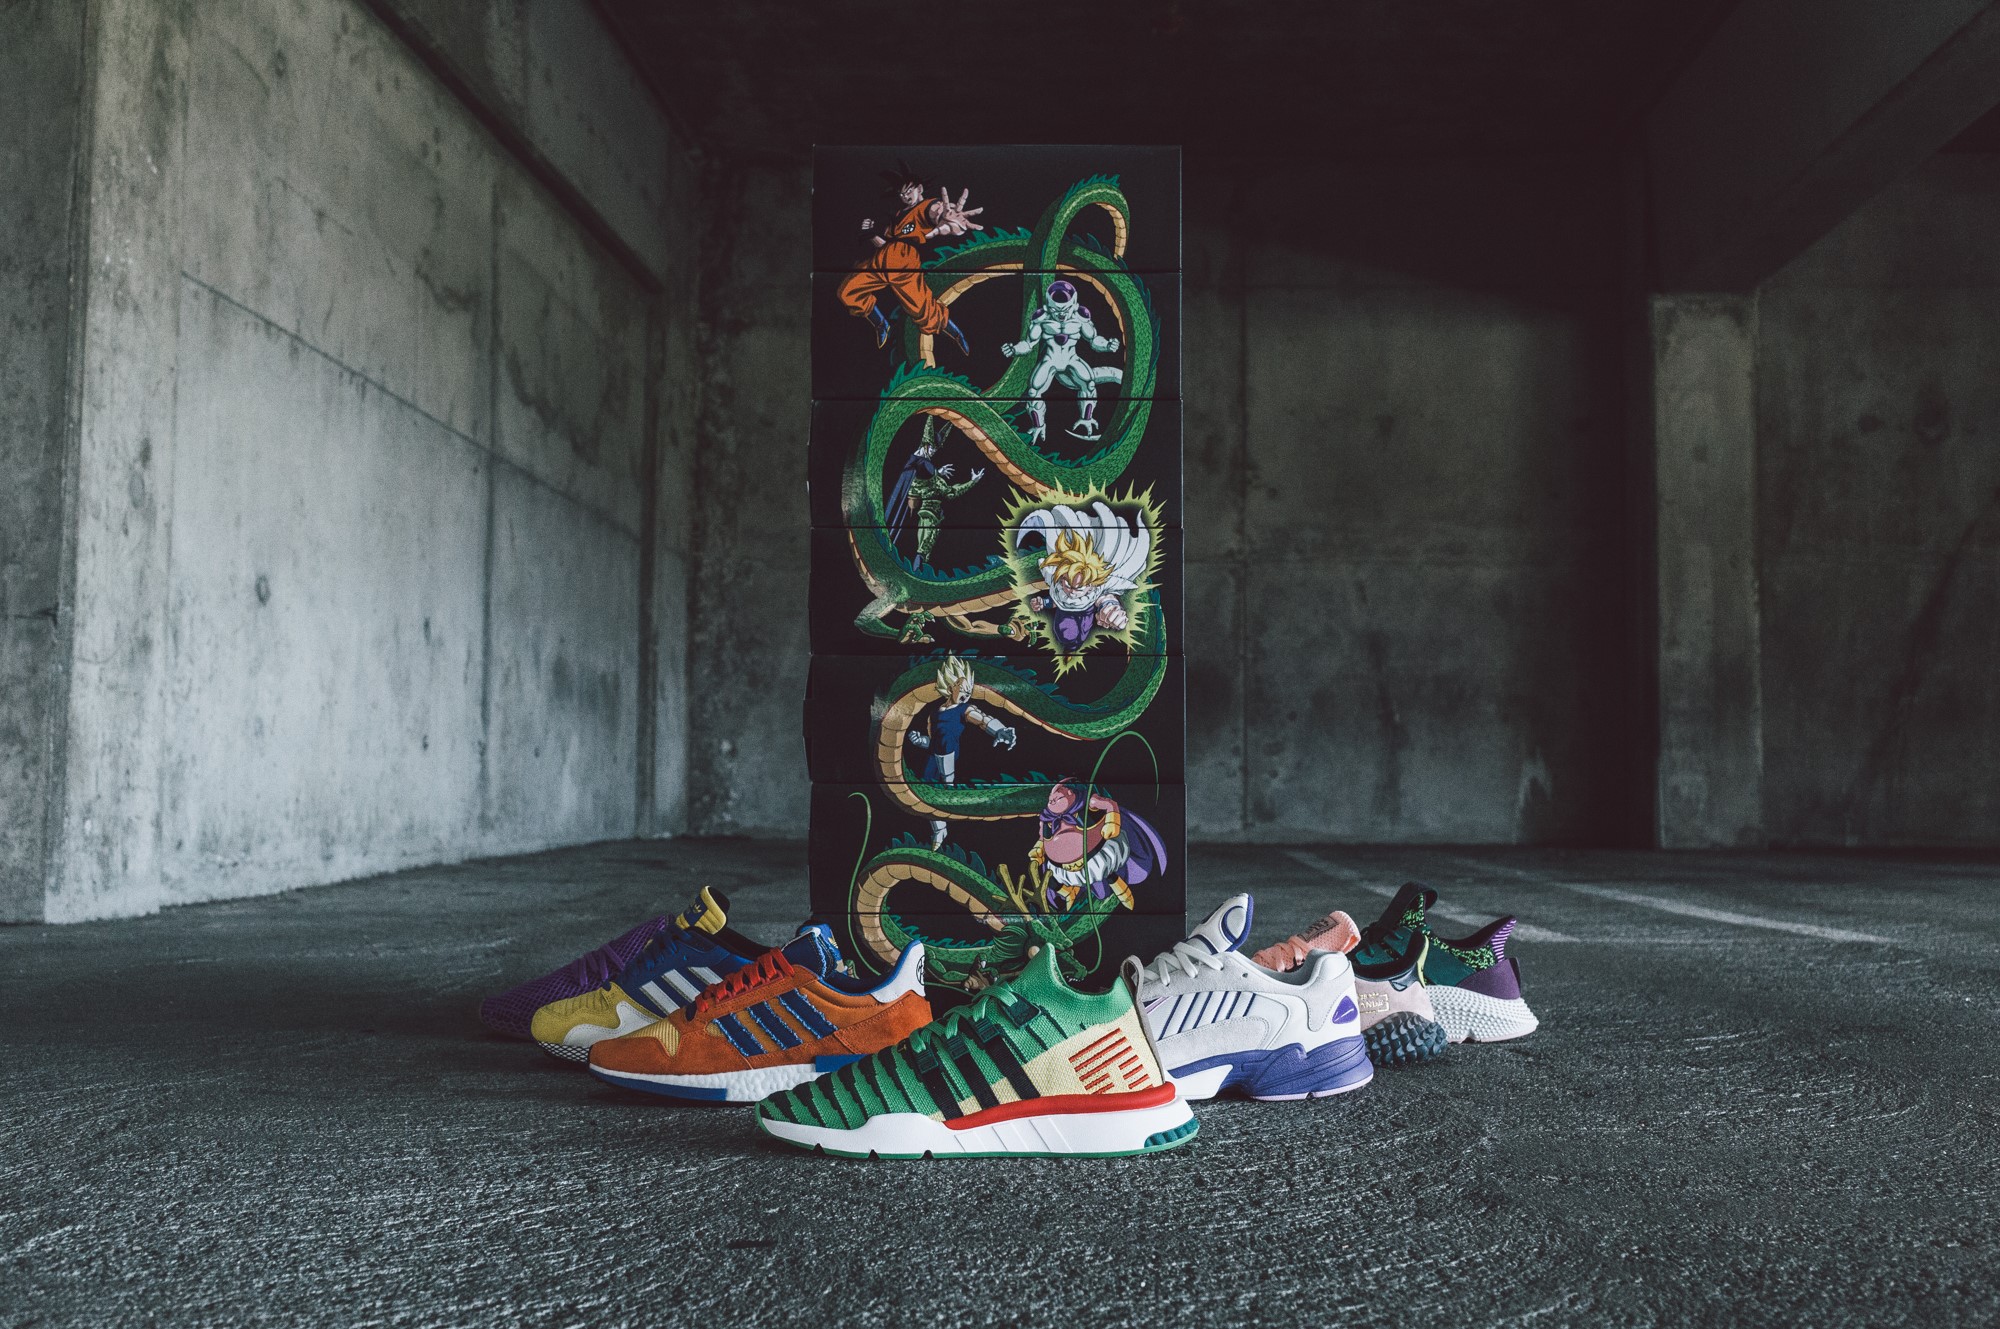 Detailed Look at the Entire 'Dragon Ball Z' adidas Sneaker 